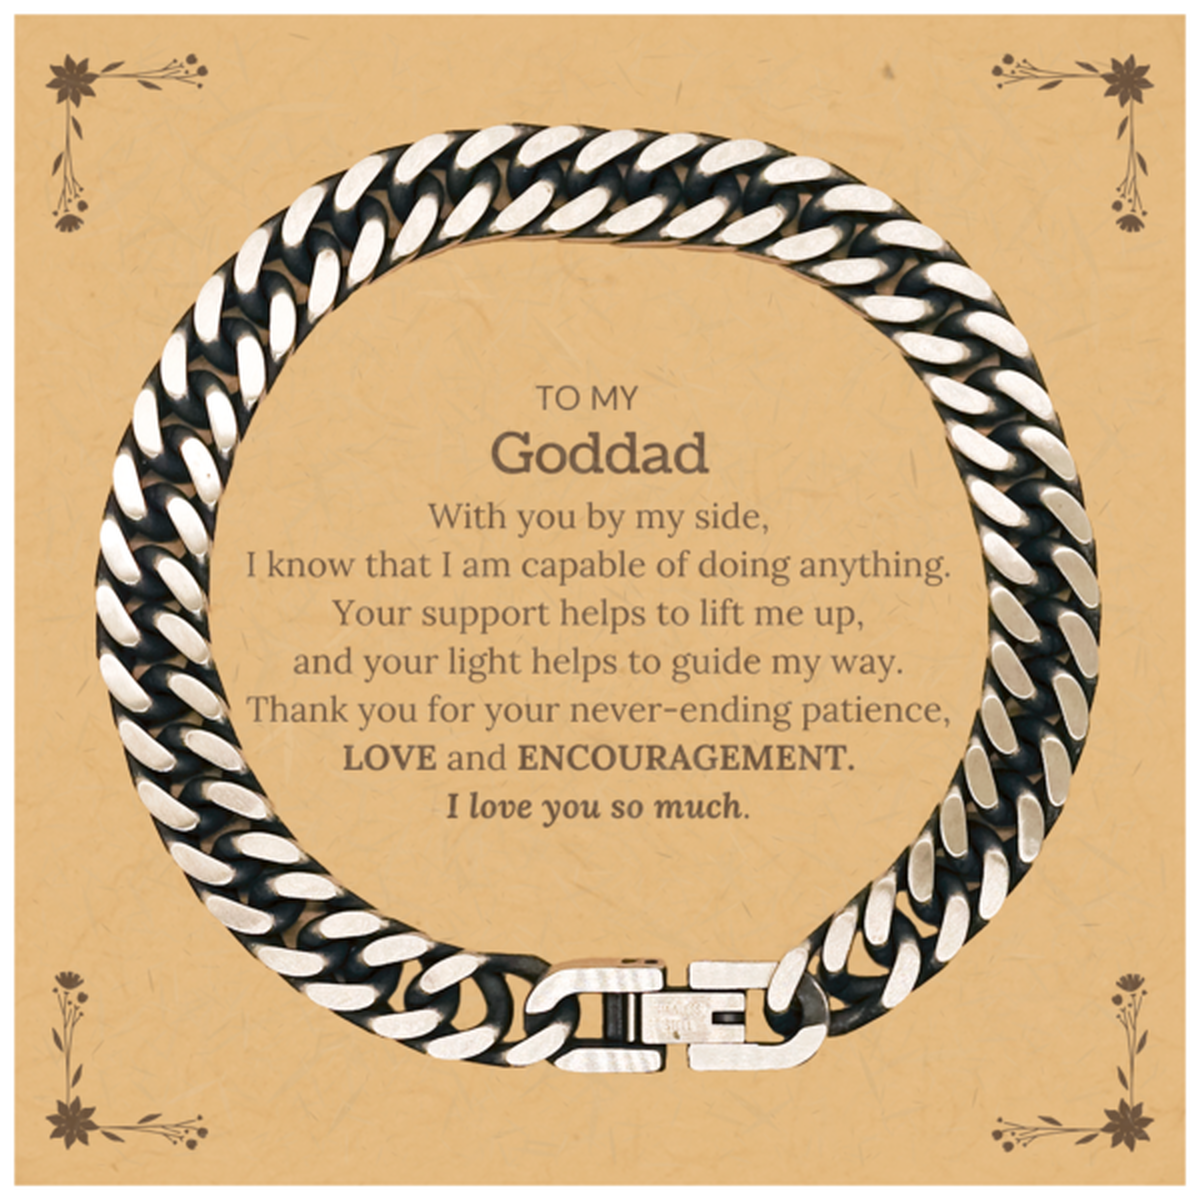 Appreciation Goddad Cuban Link Chain Bracelet Gifts, To My Goddad Birthday Christmas Wedding Keepsake Gifts for Goddad With you by my side, I know that I am capable of doing anything. I love you so much